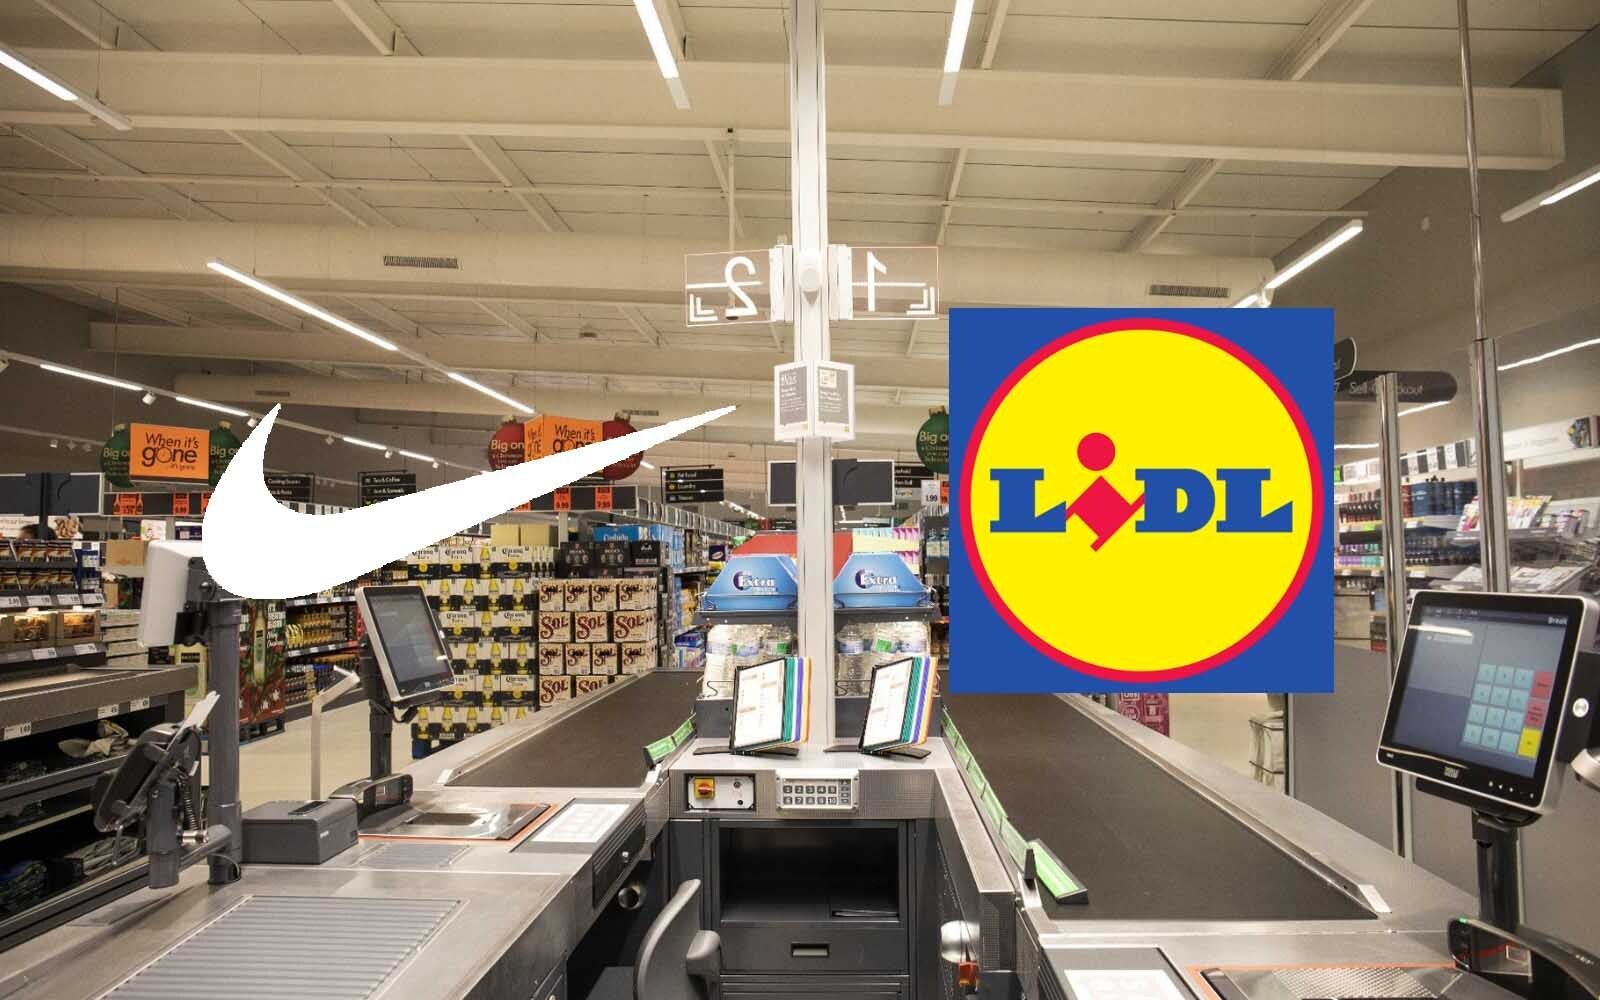 Nike will no sell part of its collections on Lidl's website